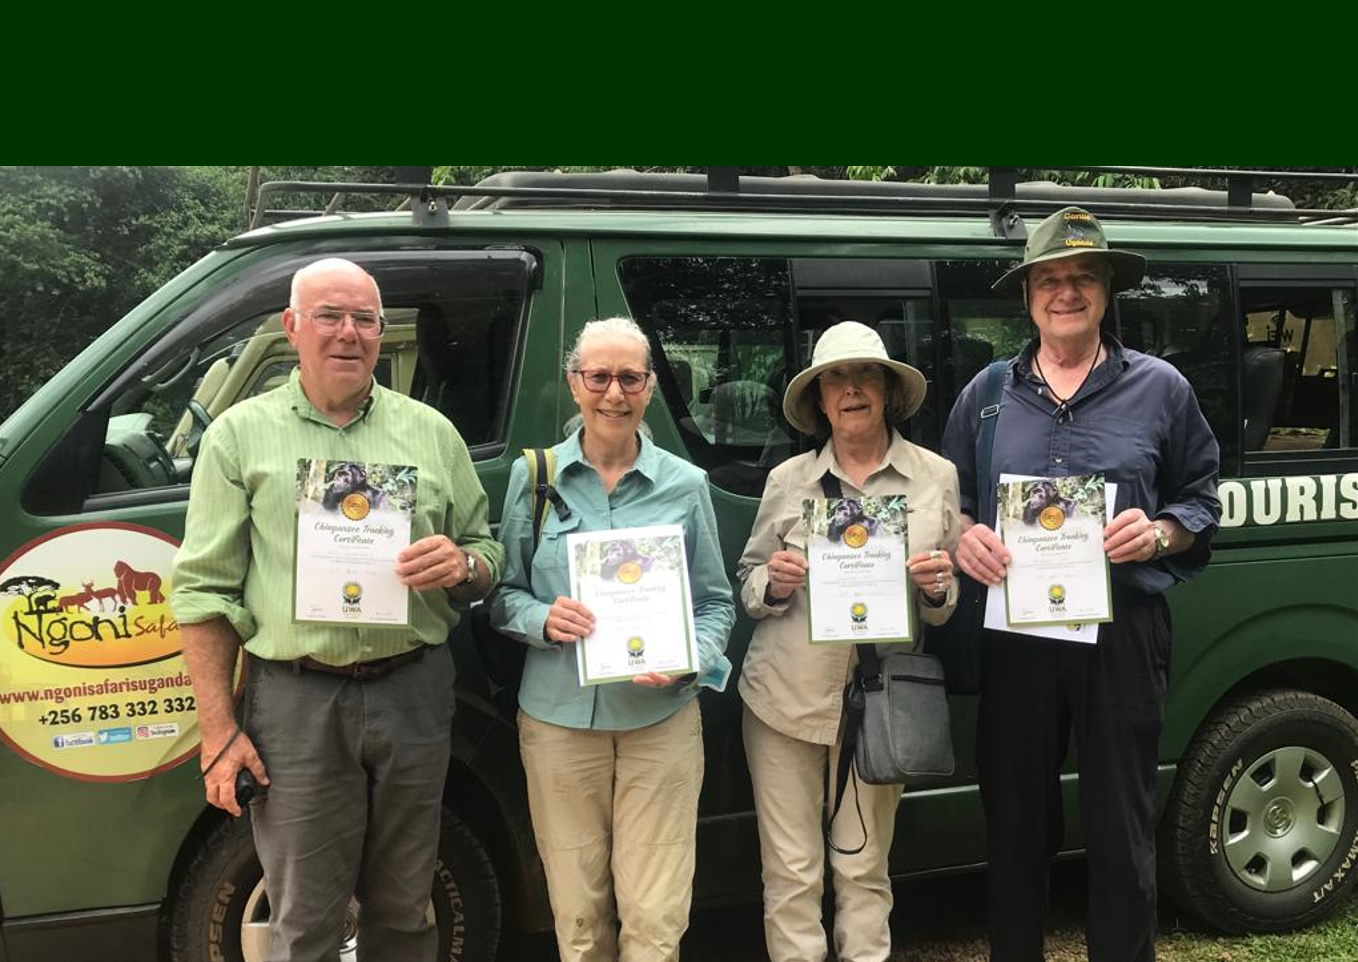 Our Recent group from USA after being awarded with Chimpanzee Tracking Certificates.